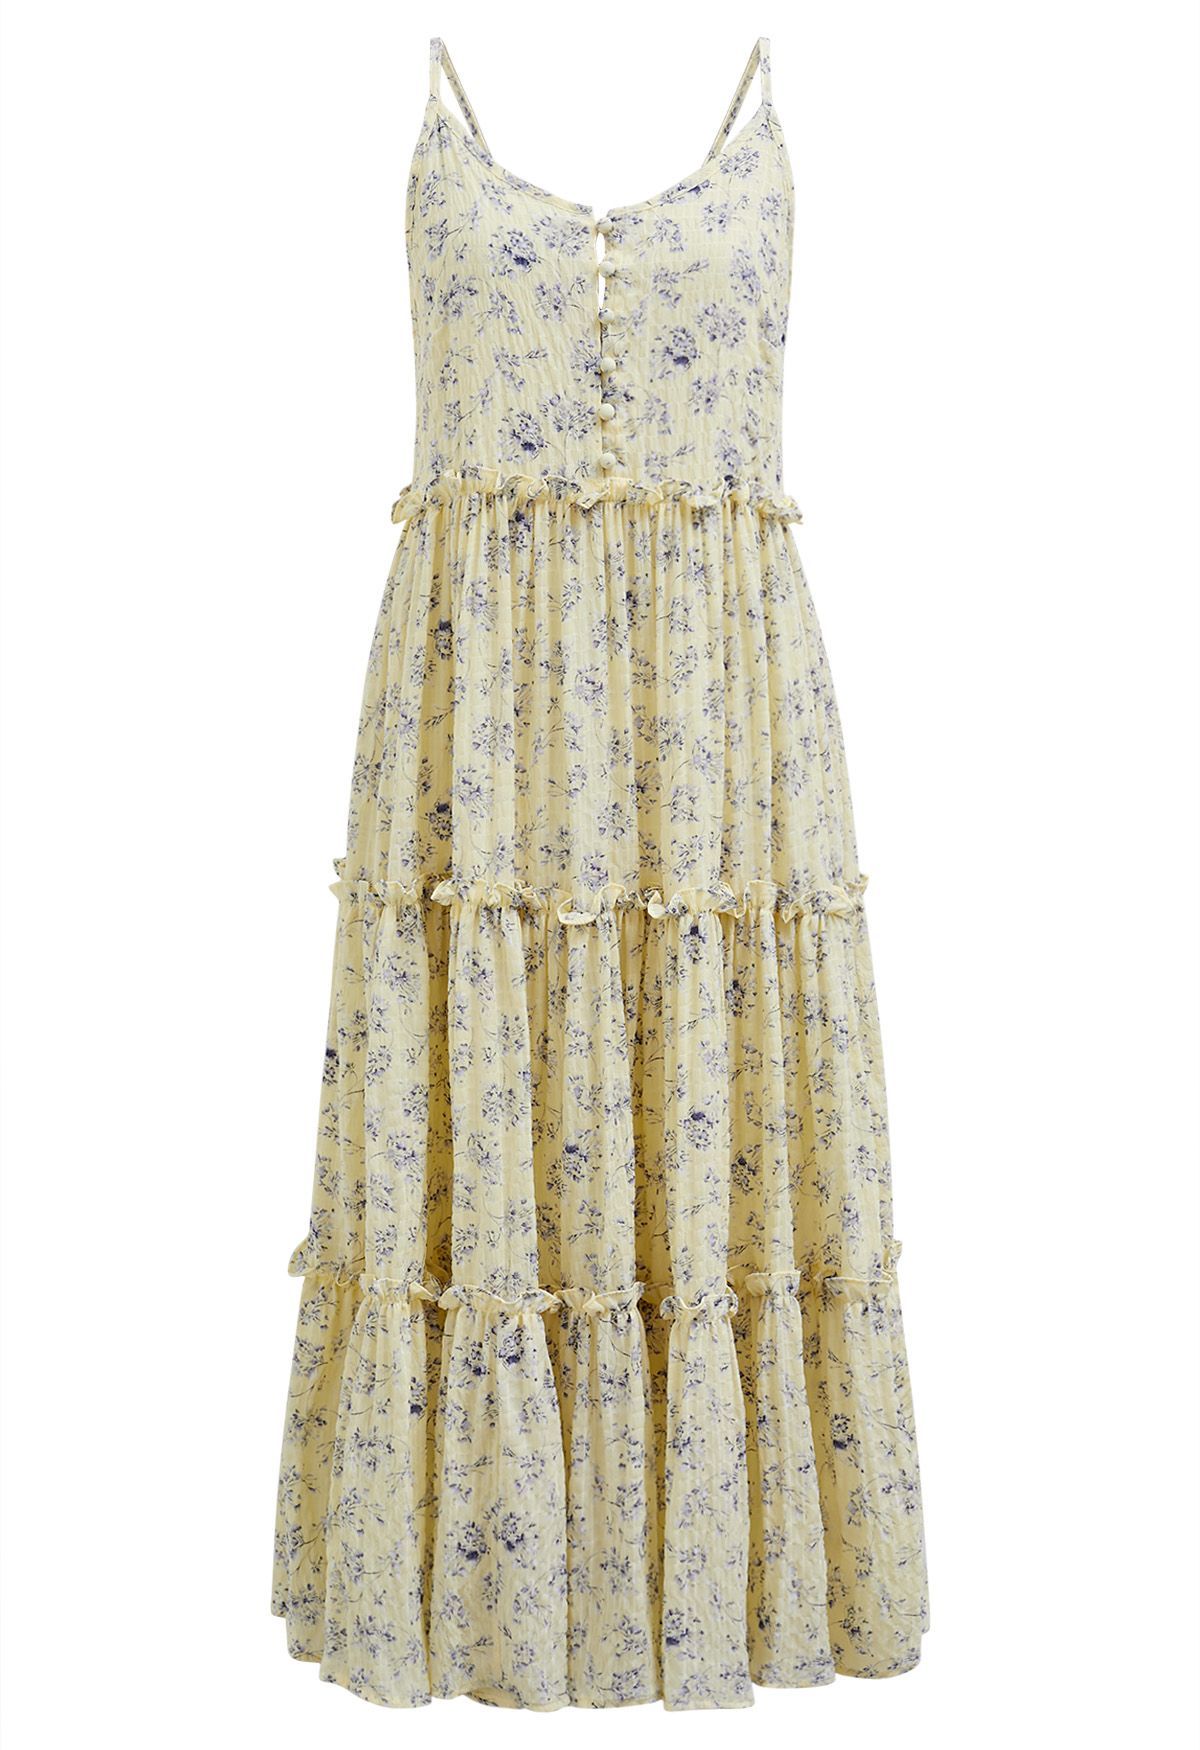 Floral Front Buttoned Ruffled Trim Cami Midi Dress in Light Yellow | Chicwish